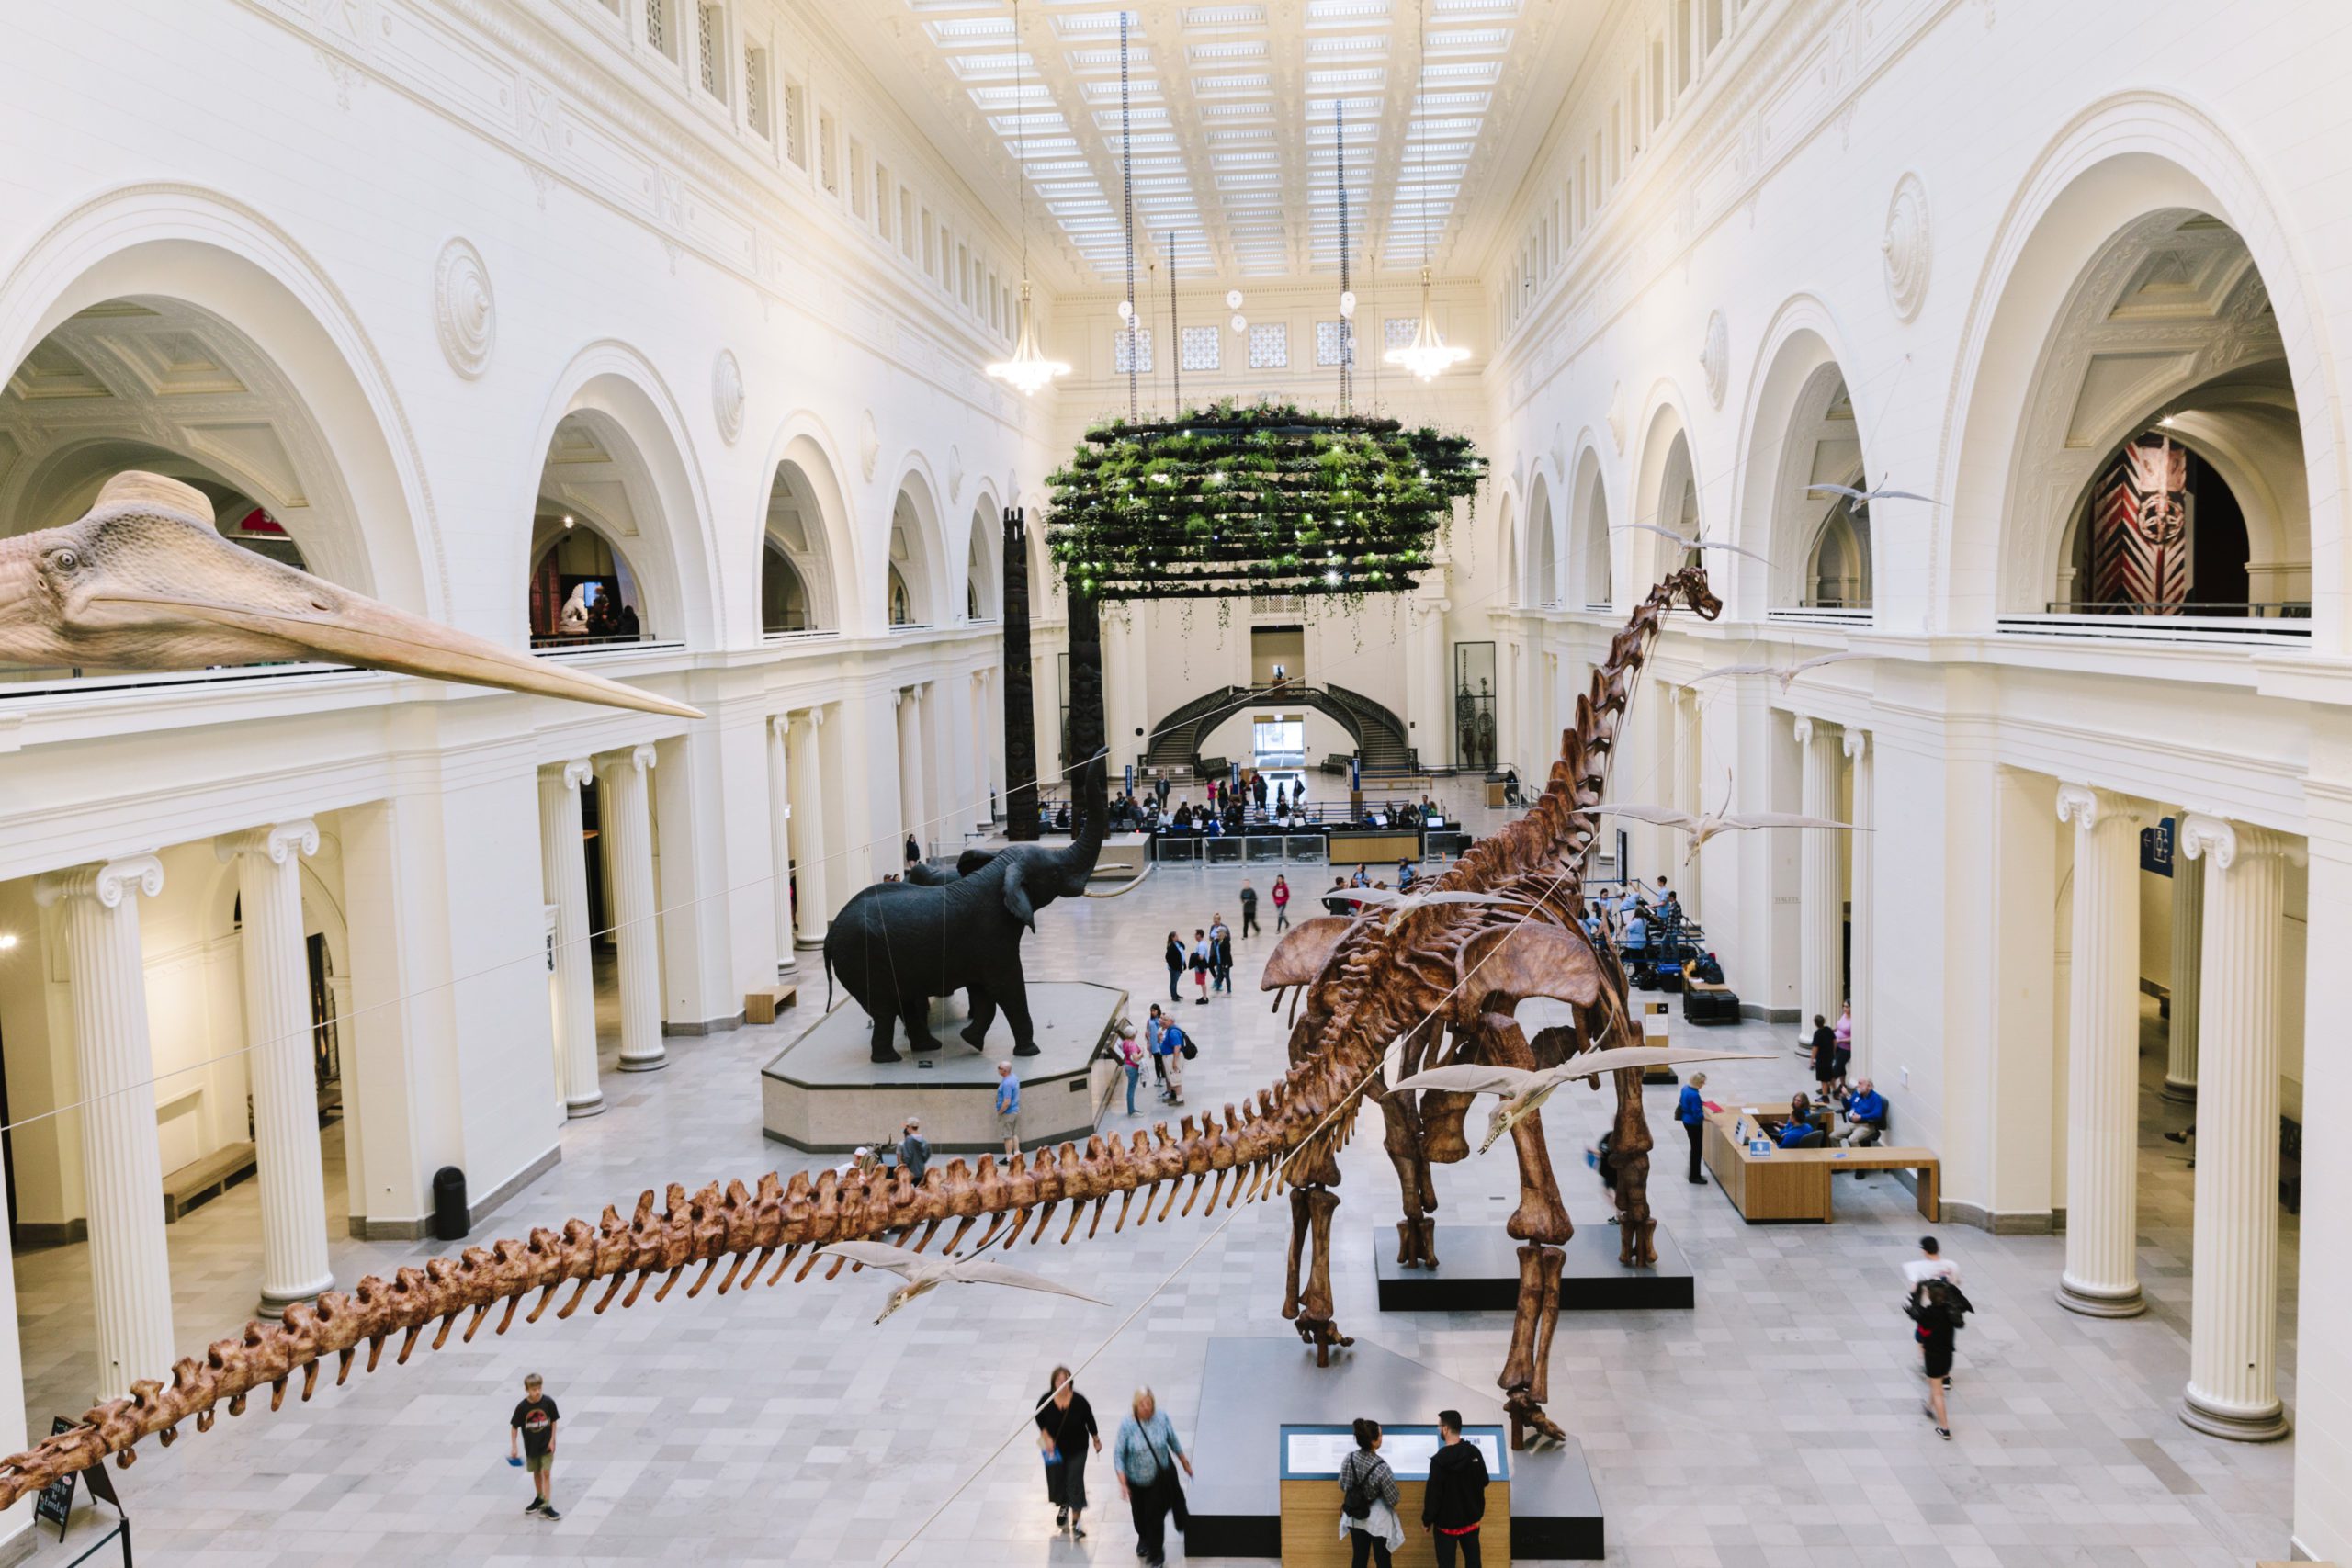 ACM and Field Museum Announce New Partnership, Program - Associated Colleges of the Midwest